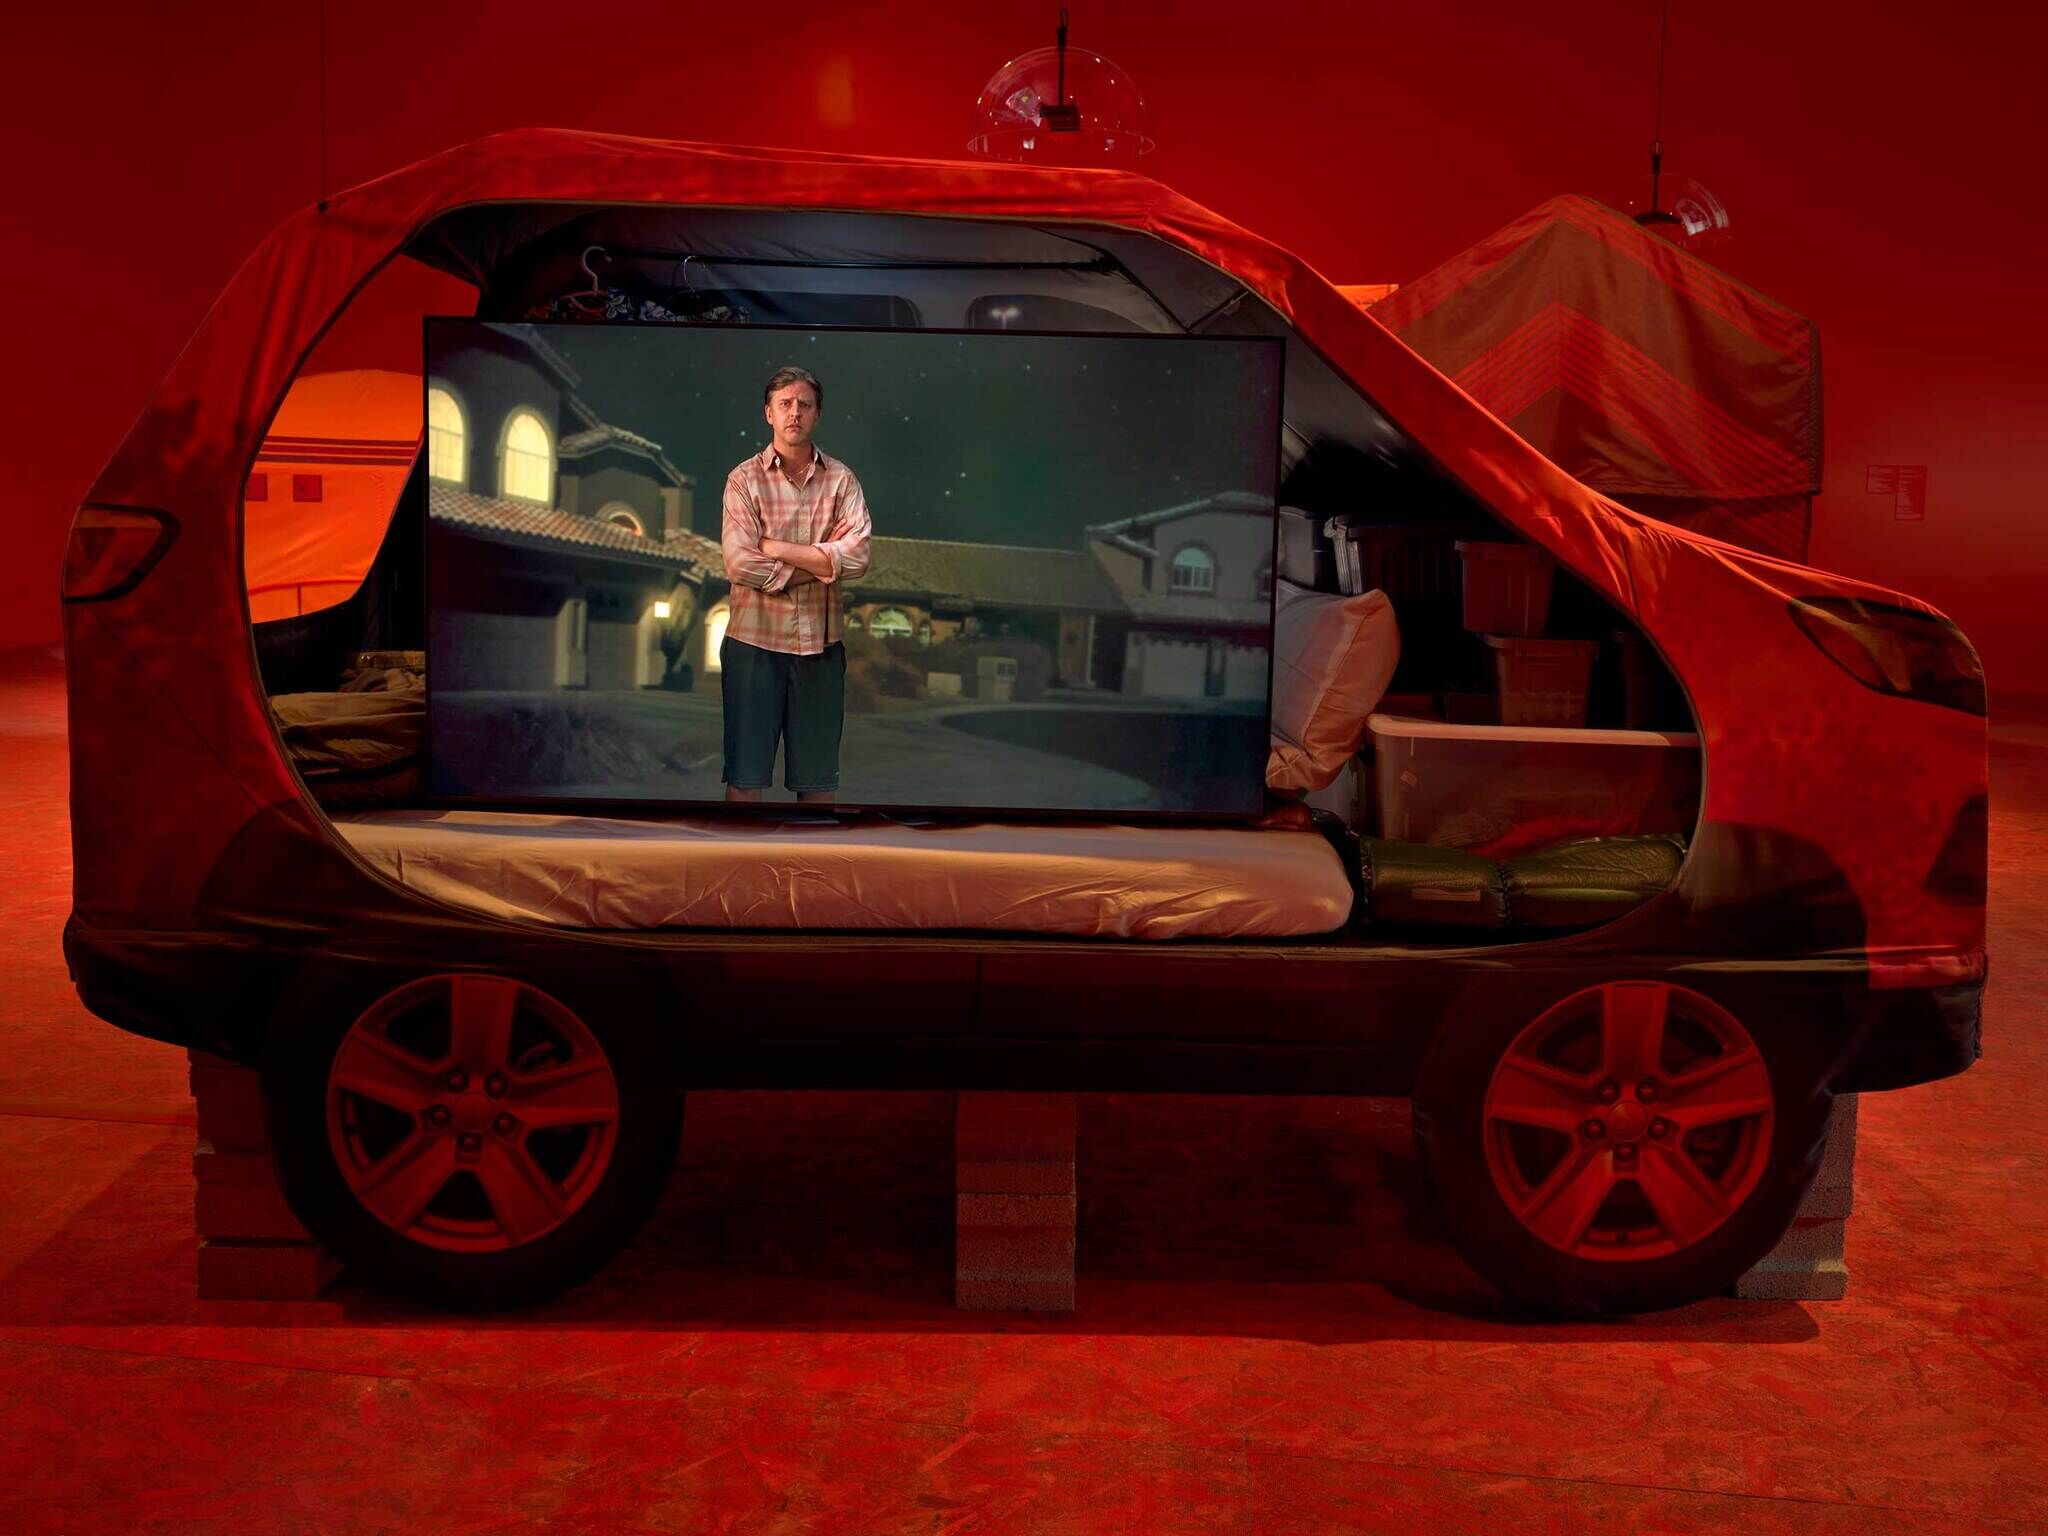 A car drenched in red light with a screen inside with an image of a man in the suburbs.